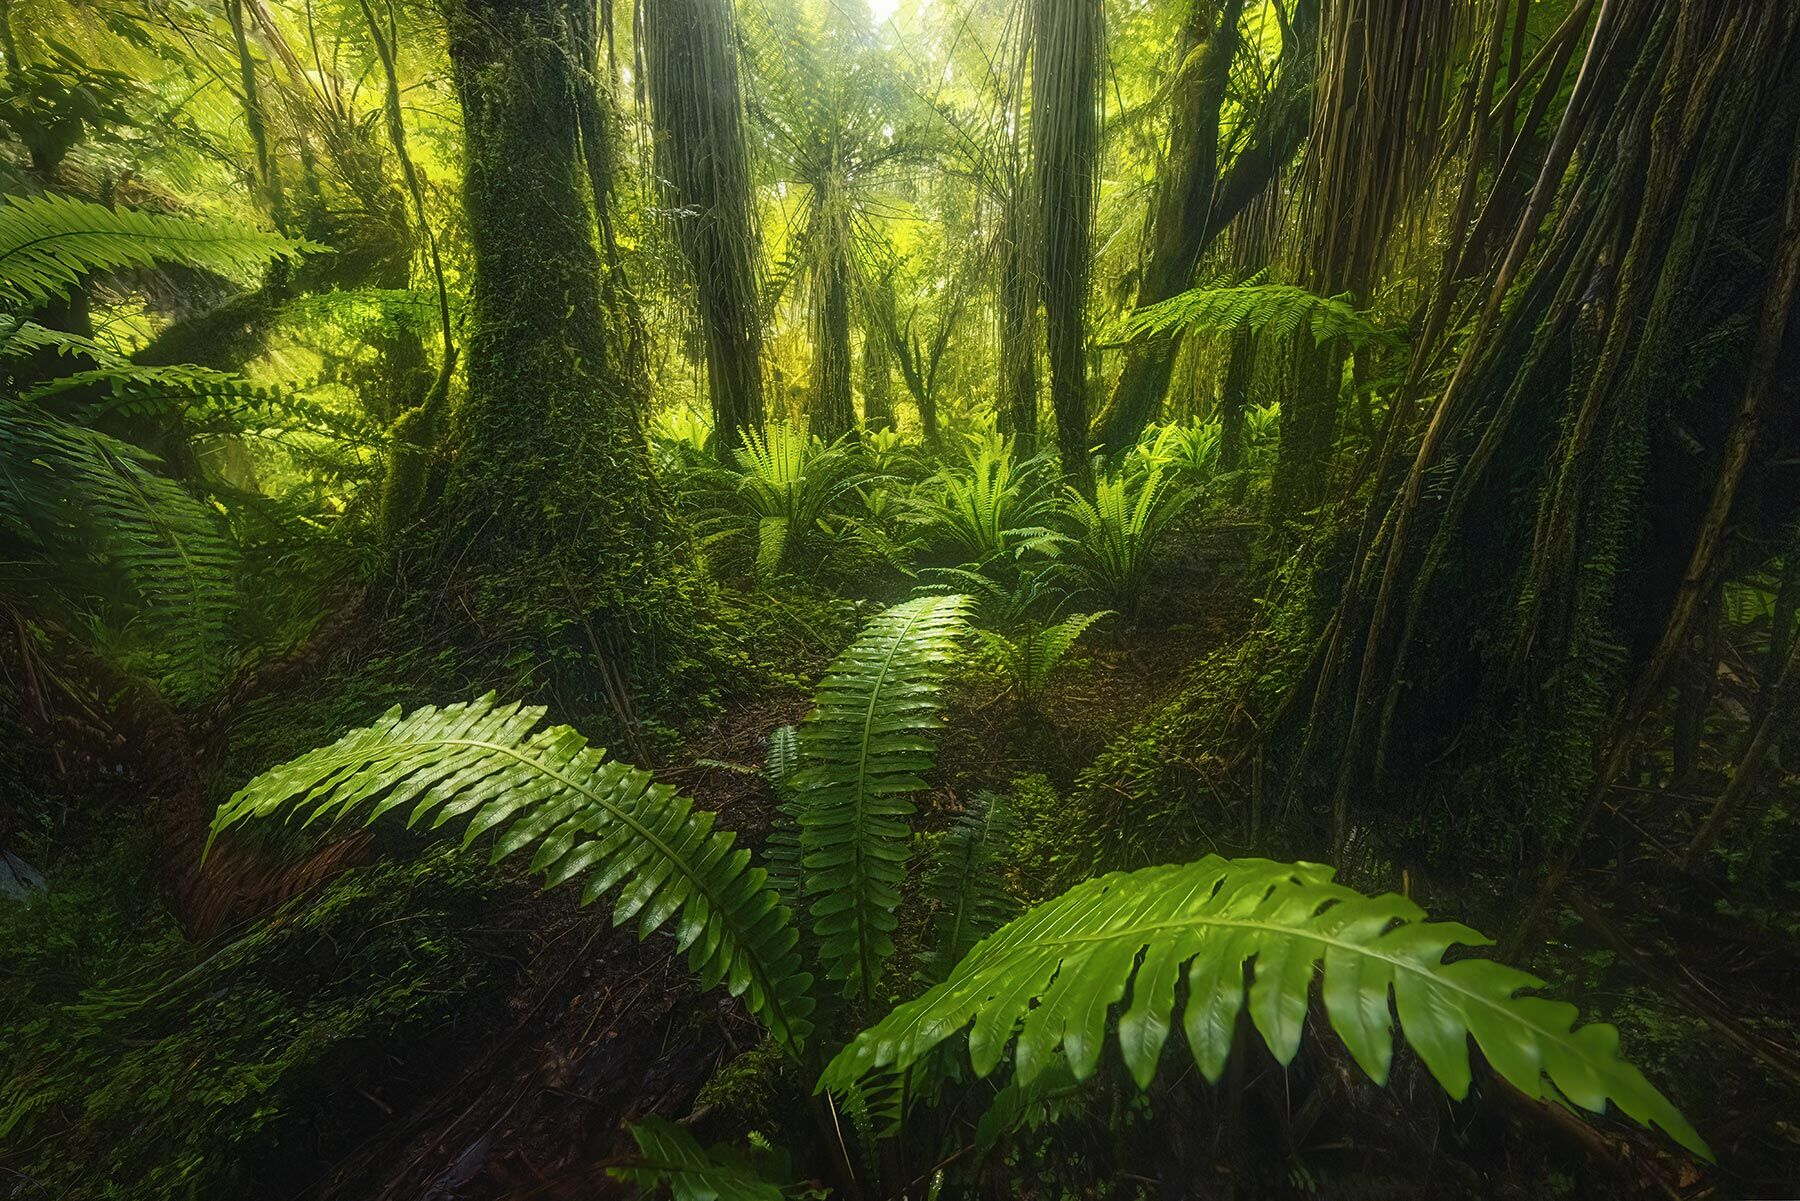 The ancient forest deep in Fiordland, New Zealand